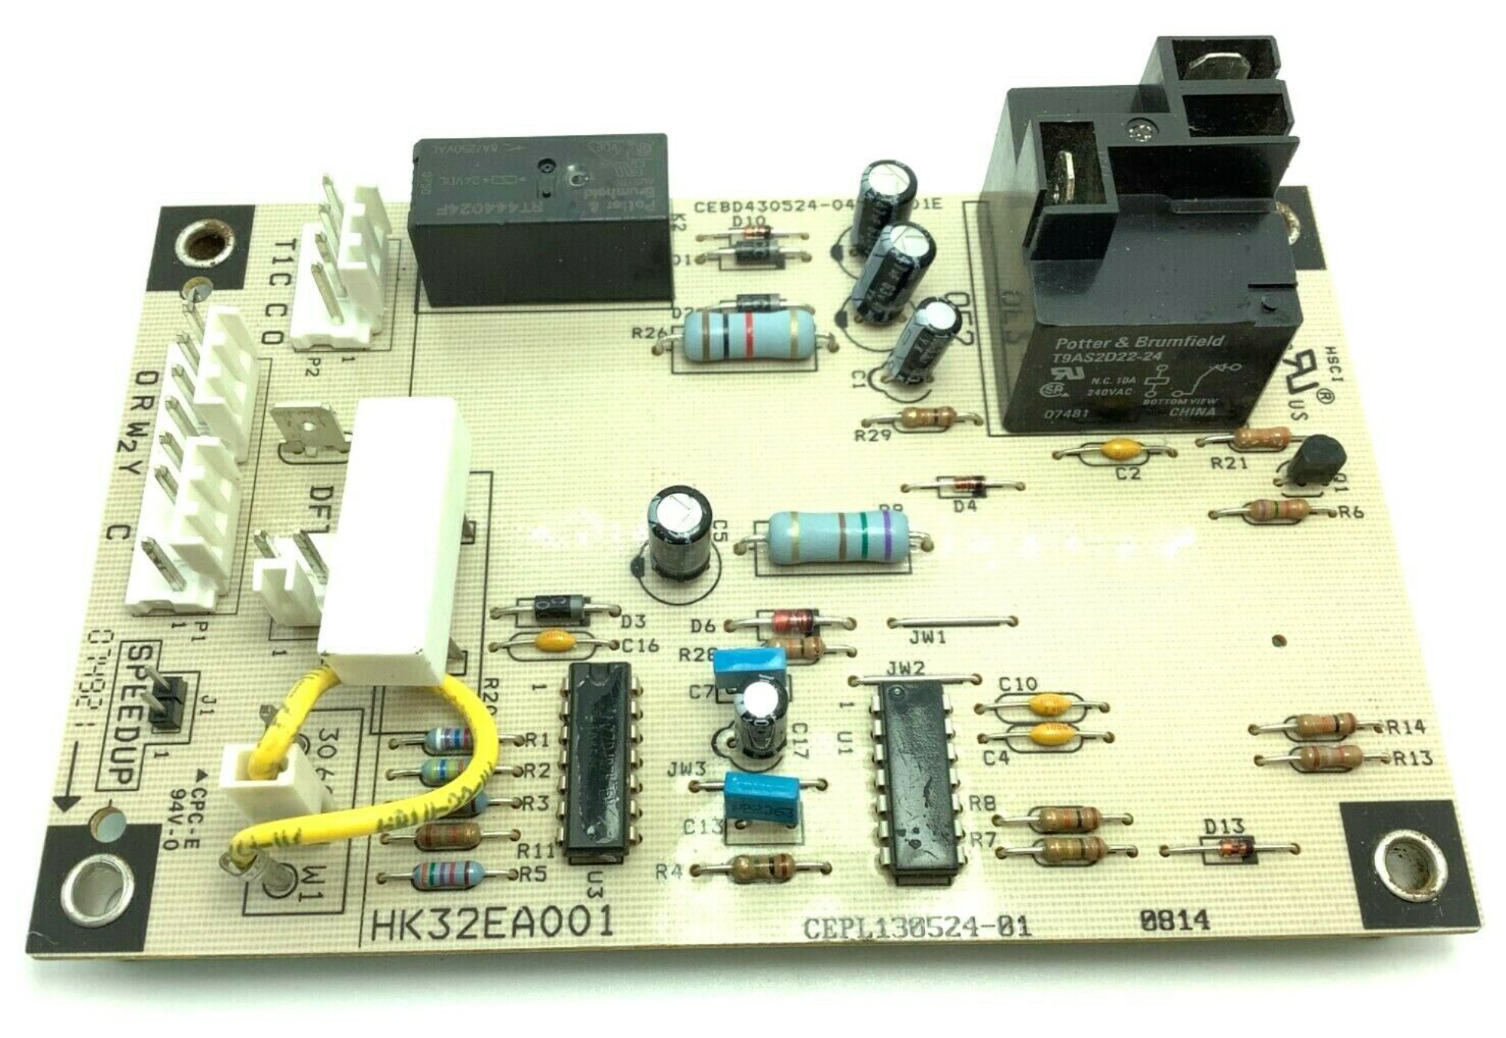 HK32EA001 Defrost control board for Carrier, Bryant, Payne, 1173636 Heat Pump